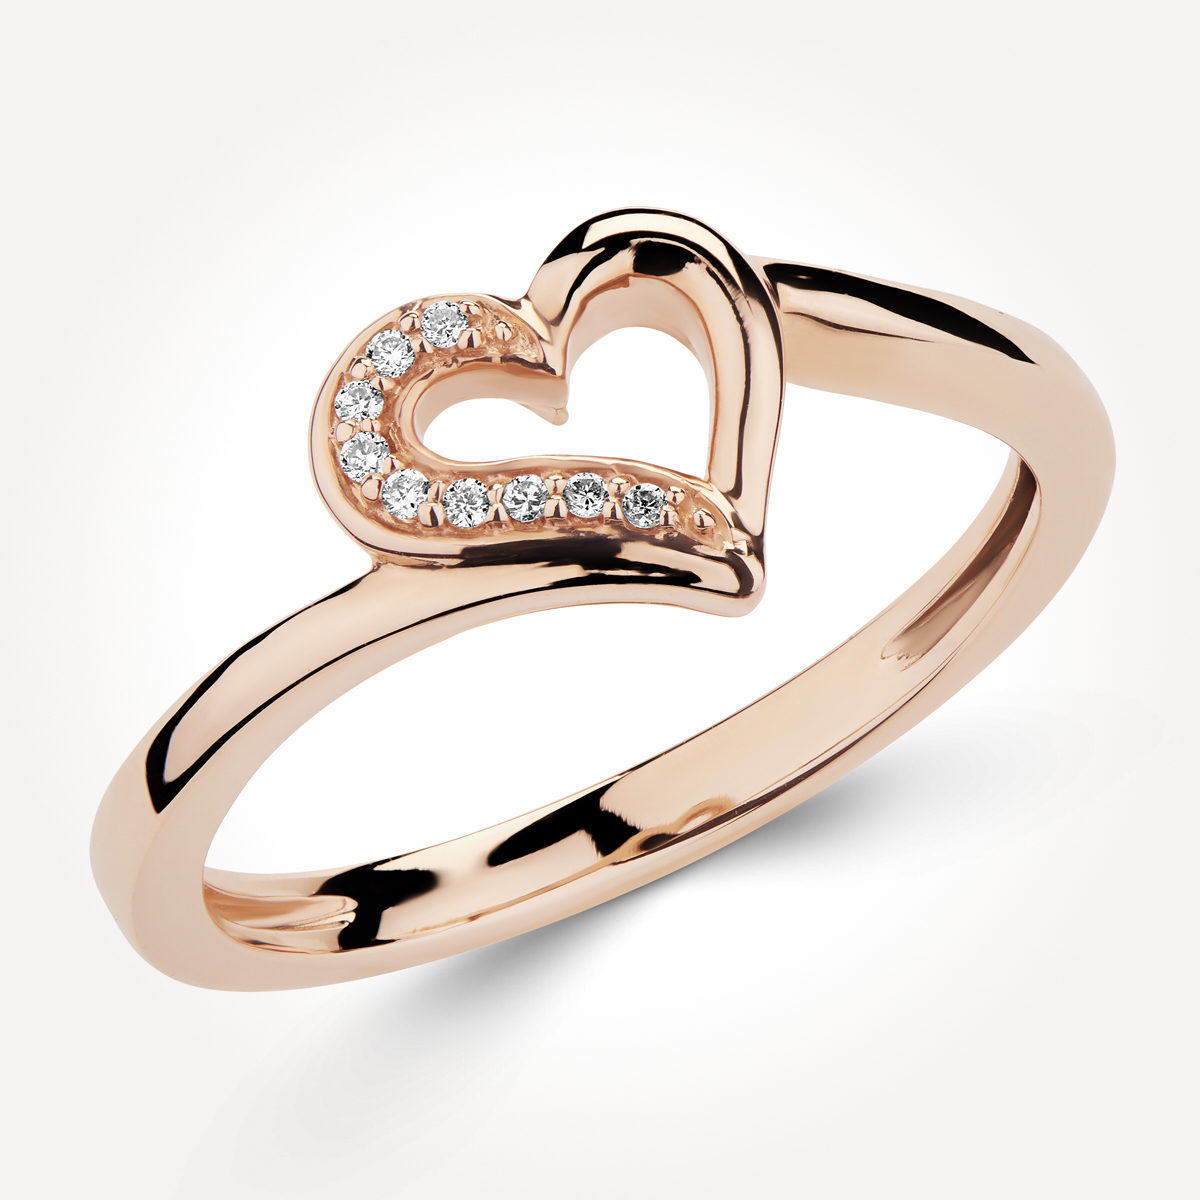 14KT Rose Gold Heart Ring 0.03 CT. T.W.